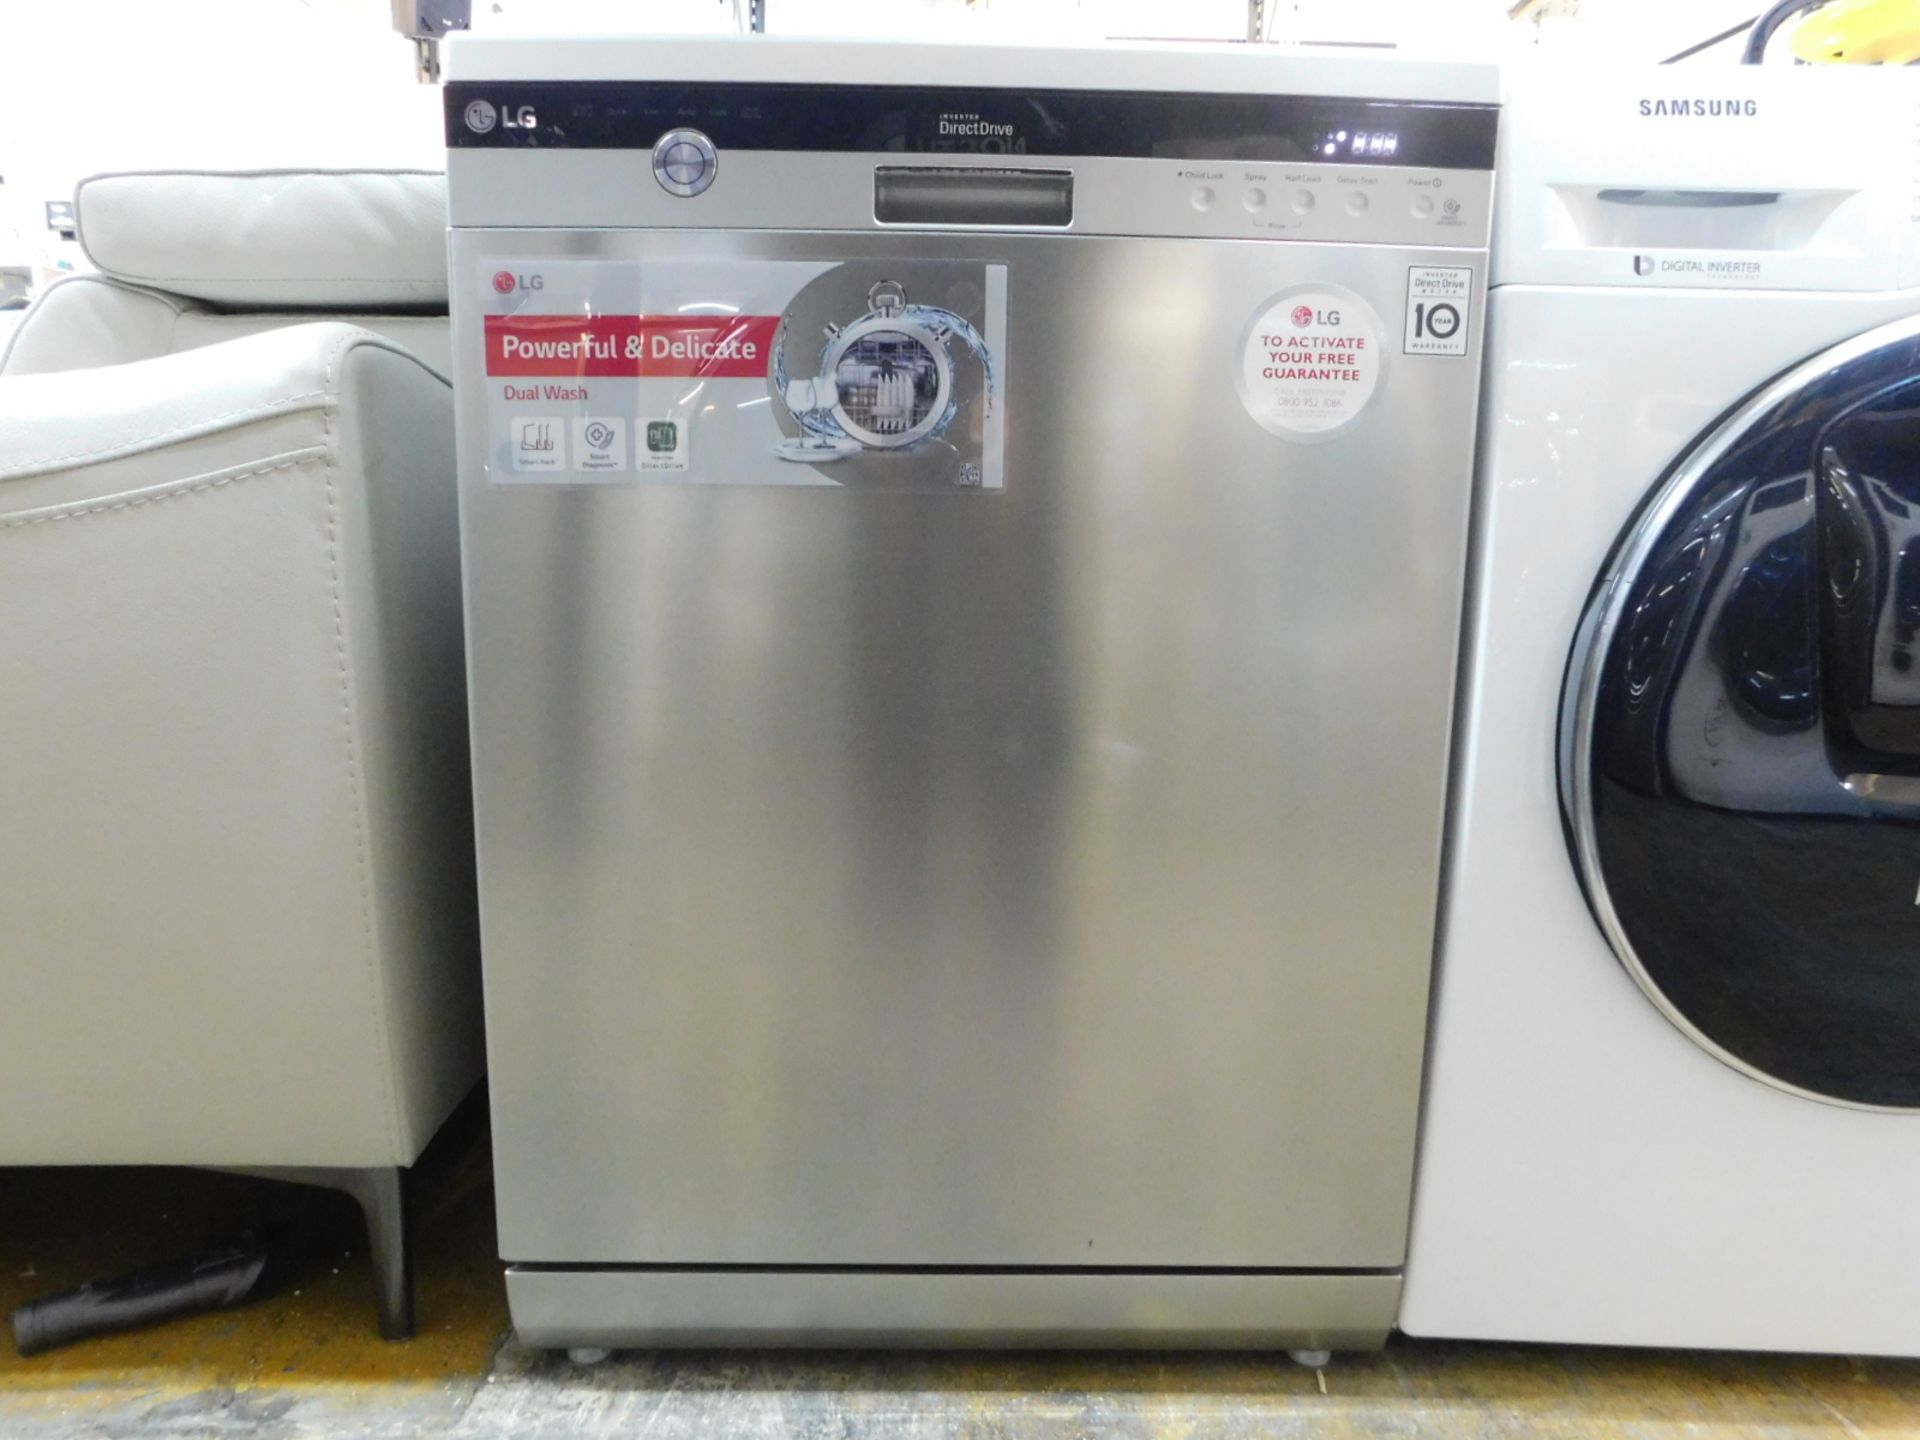 1 LG D1483CF NOBLE STEEL DISHWASHER RRP Â£699 (LIKE NEW CONDITION, POWERS ON)